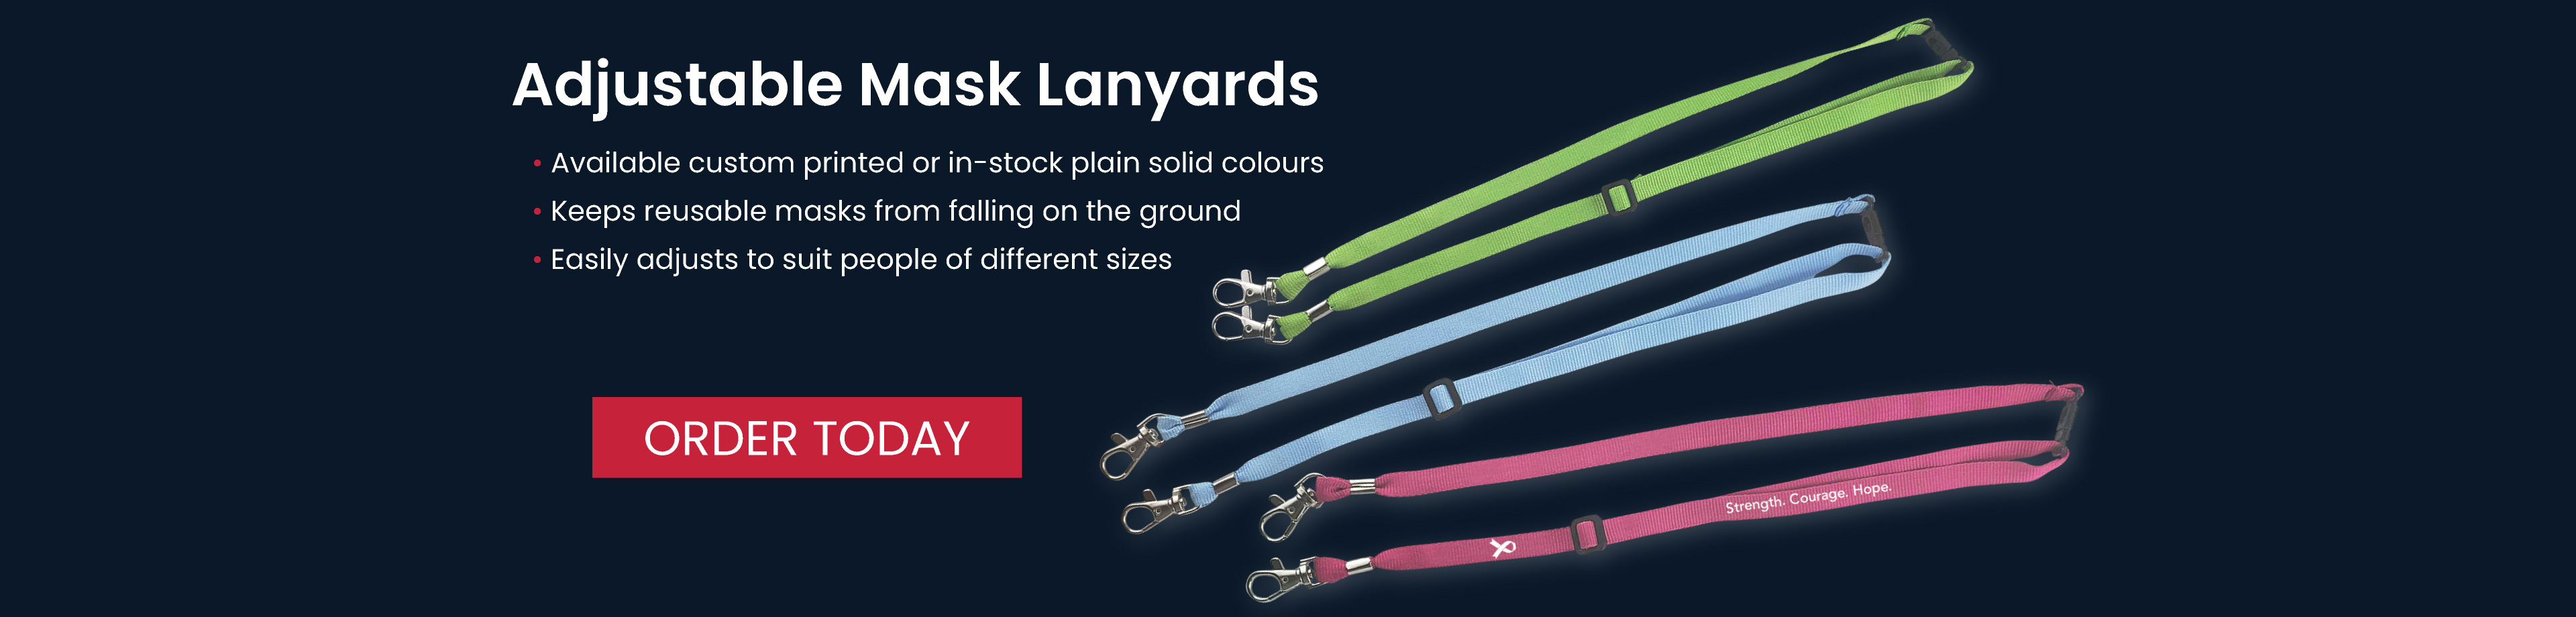 Adjustable Mask Lanyards - Never lose your mask again! These new products are available in plain solid colours or custom printed with your logo!